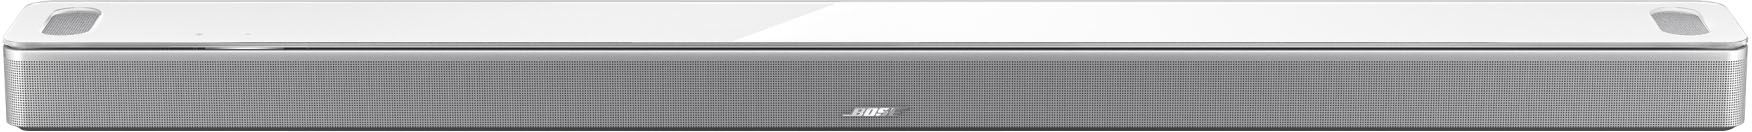 Bose Smart Ultra Soundbar with 882963-1200 Dolby Voice - Arctic Best Buy Assistant Atmos and White